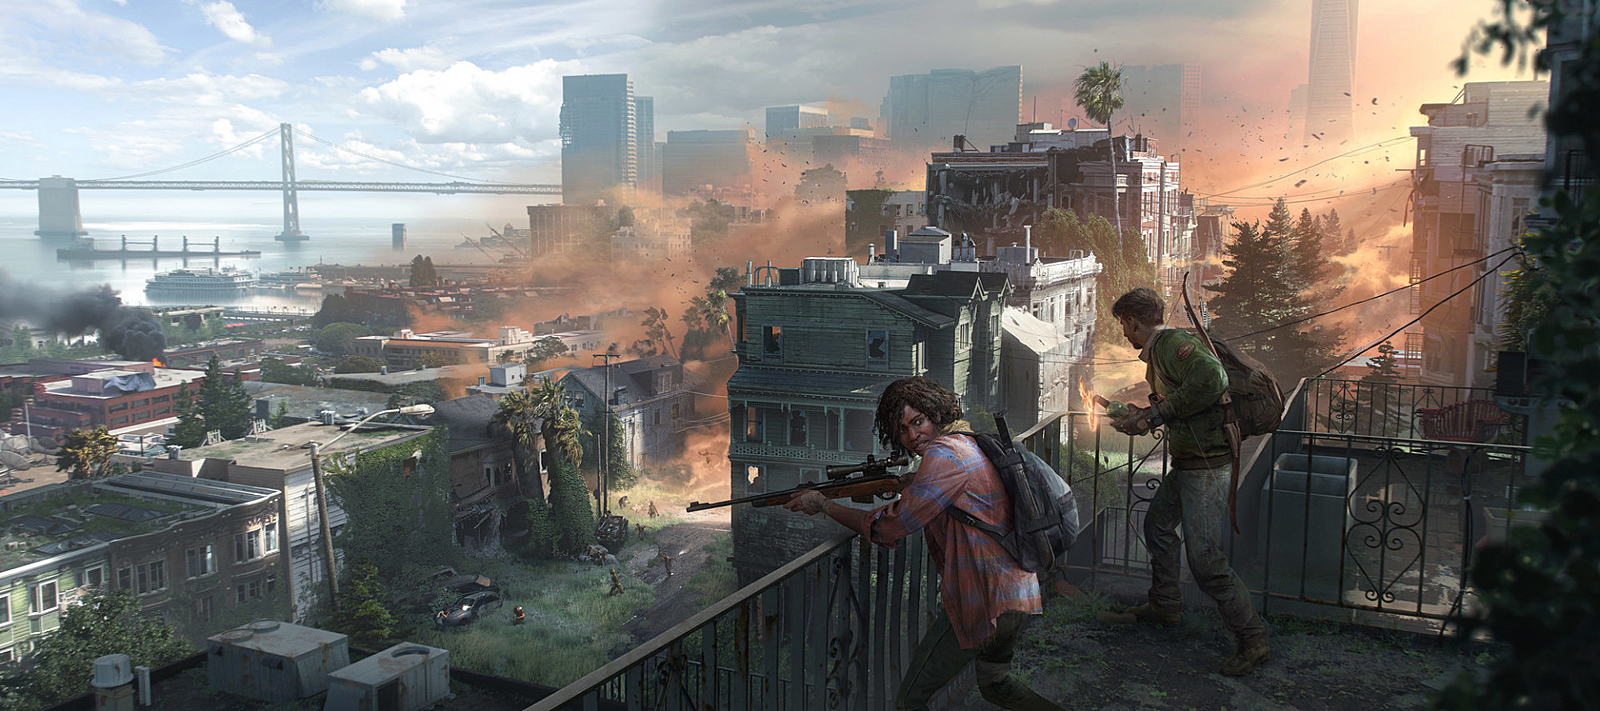 The last of us игра. The last of us 1. The last of us 1 игра. The last game безопасен